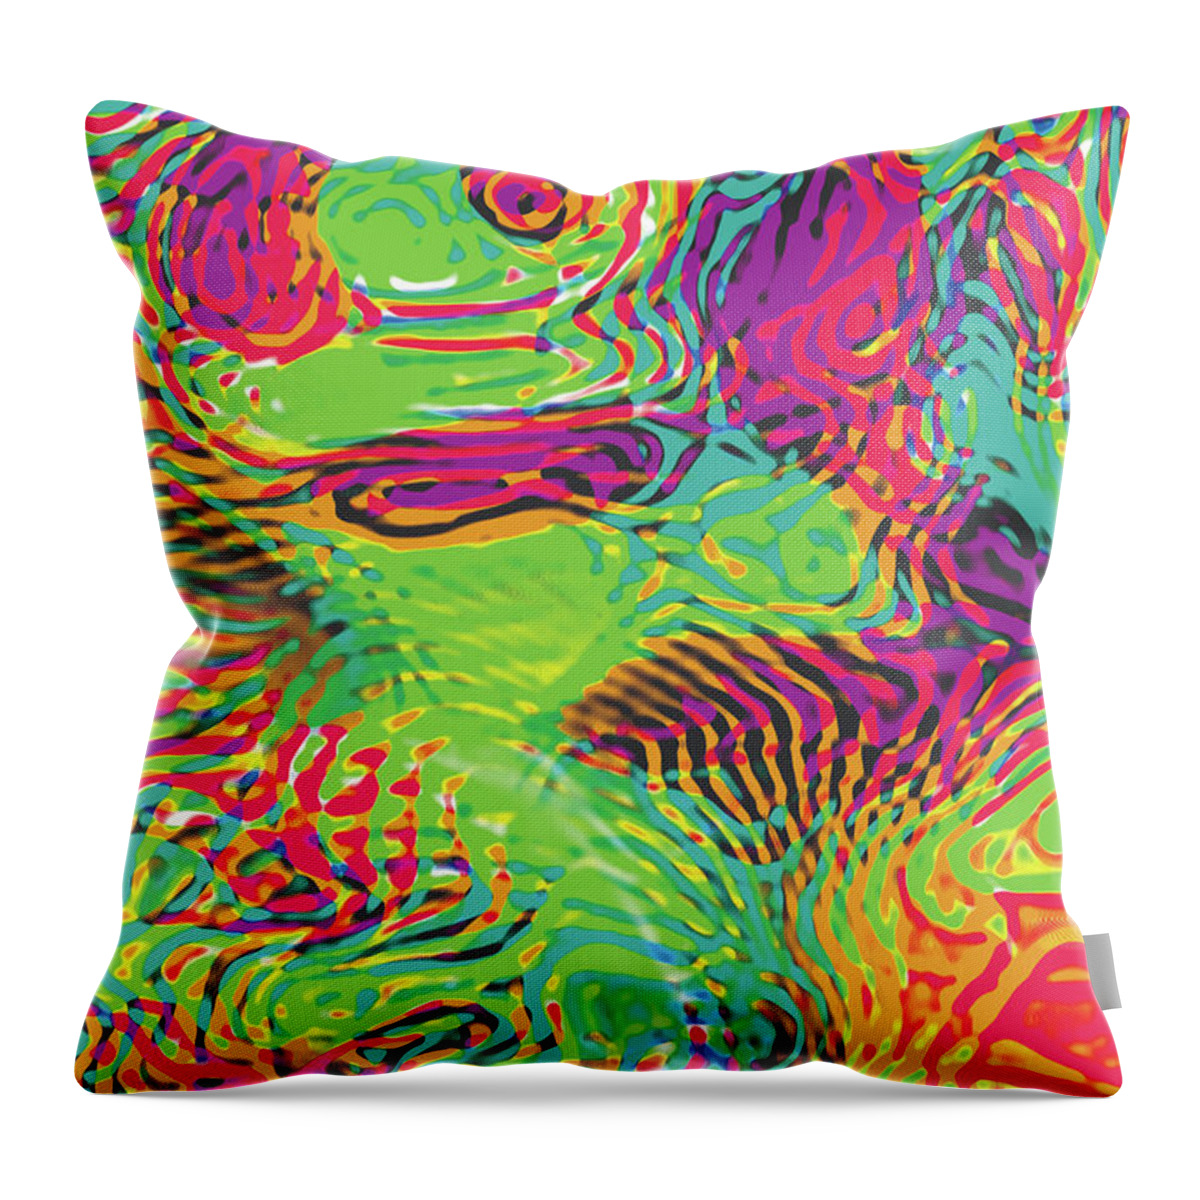 Abstract Art Throw Pillow featuring the digital art Primary Ripples In Green by David Davies